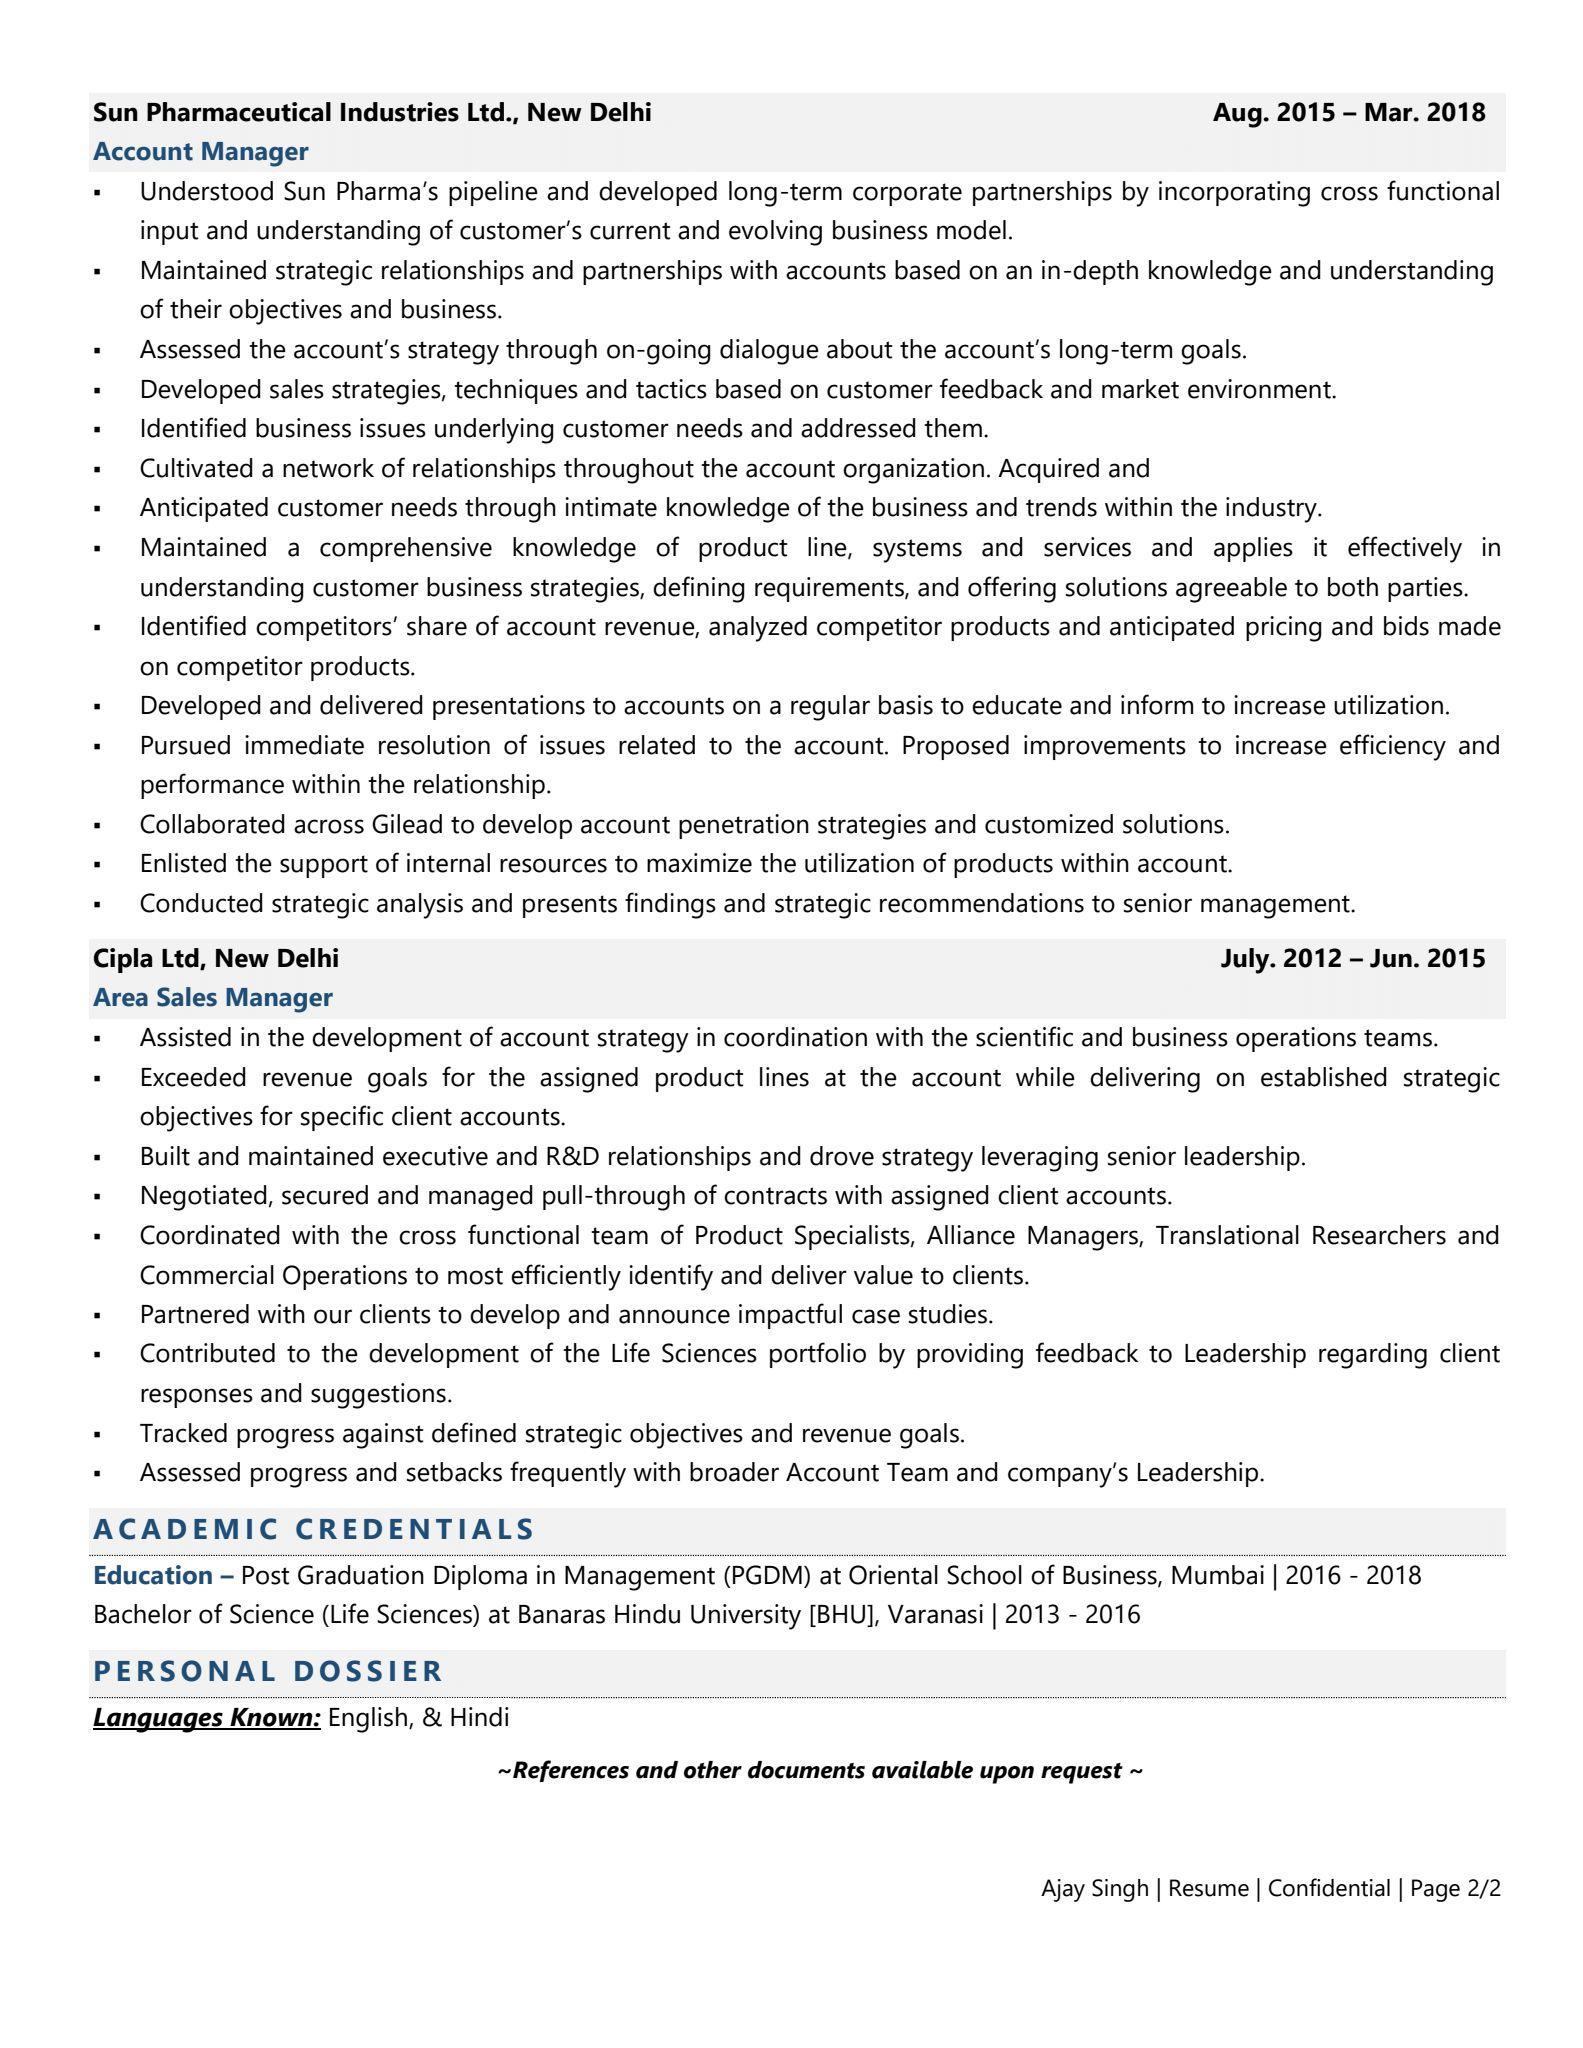 Account Manager (Pharma) - Resume Example & Template